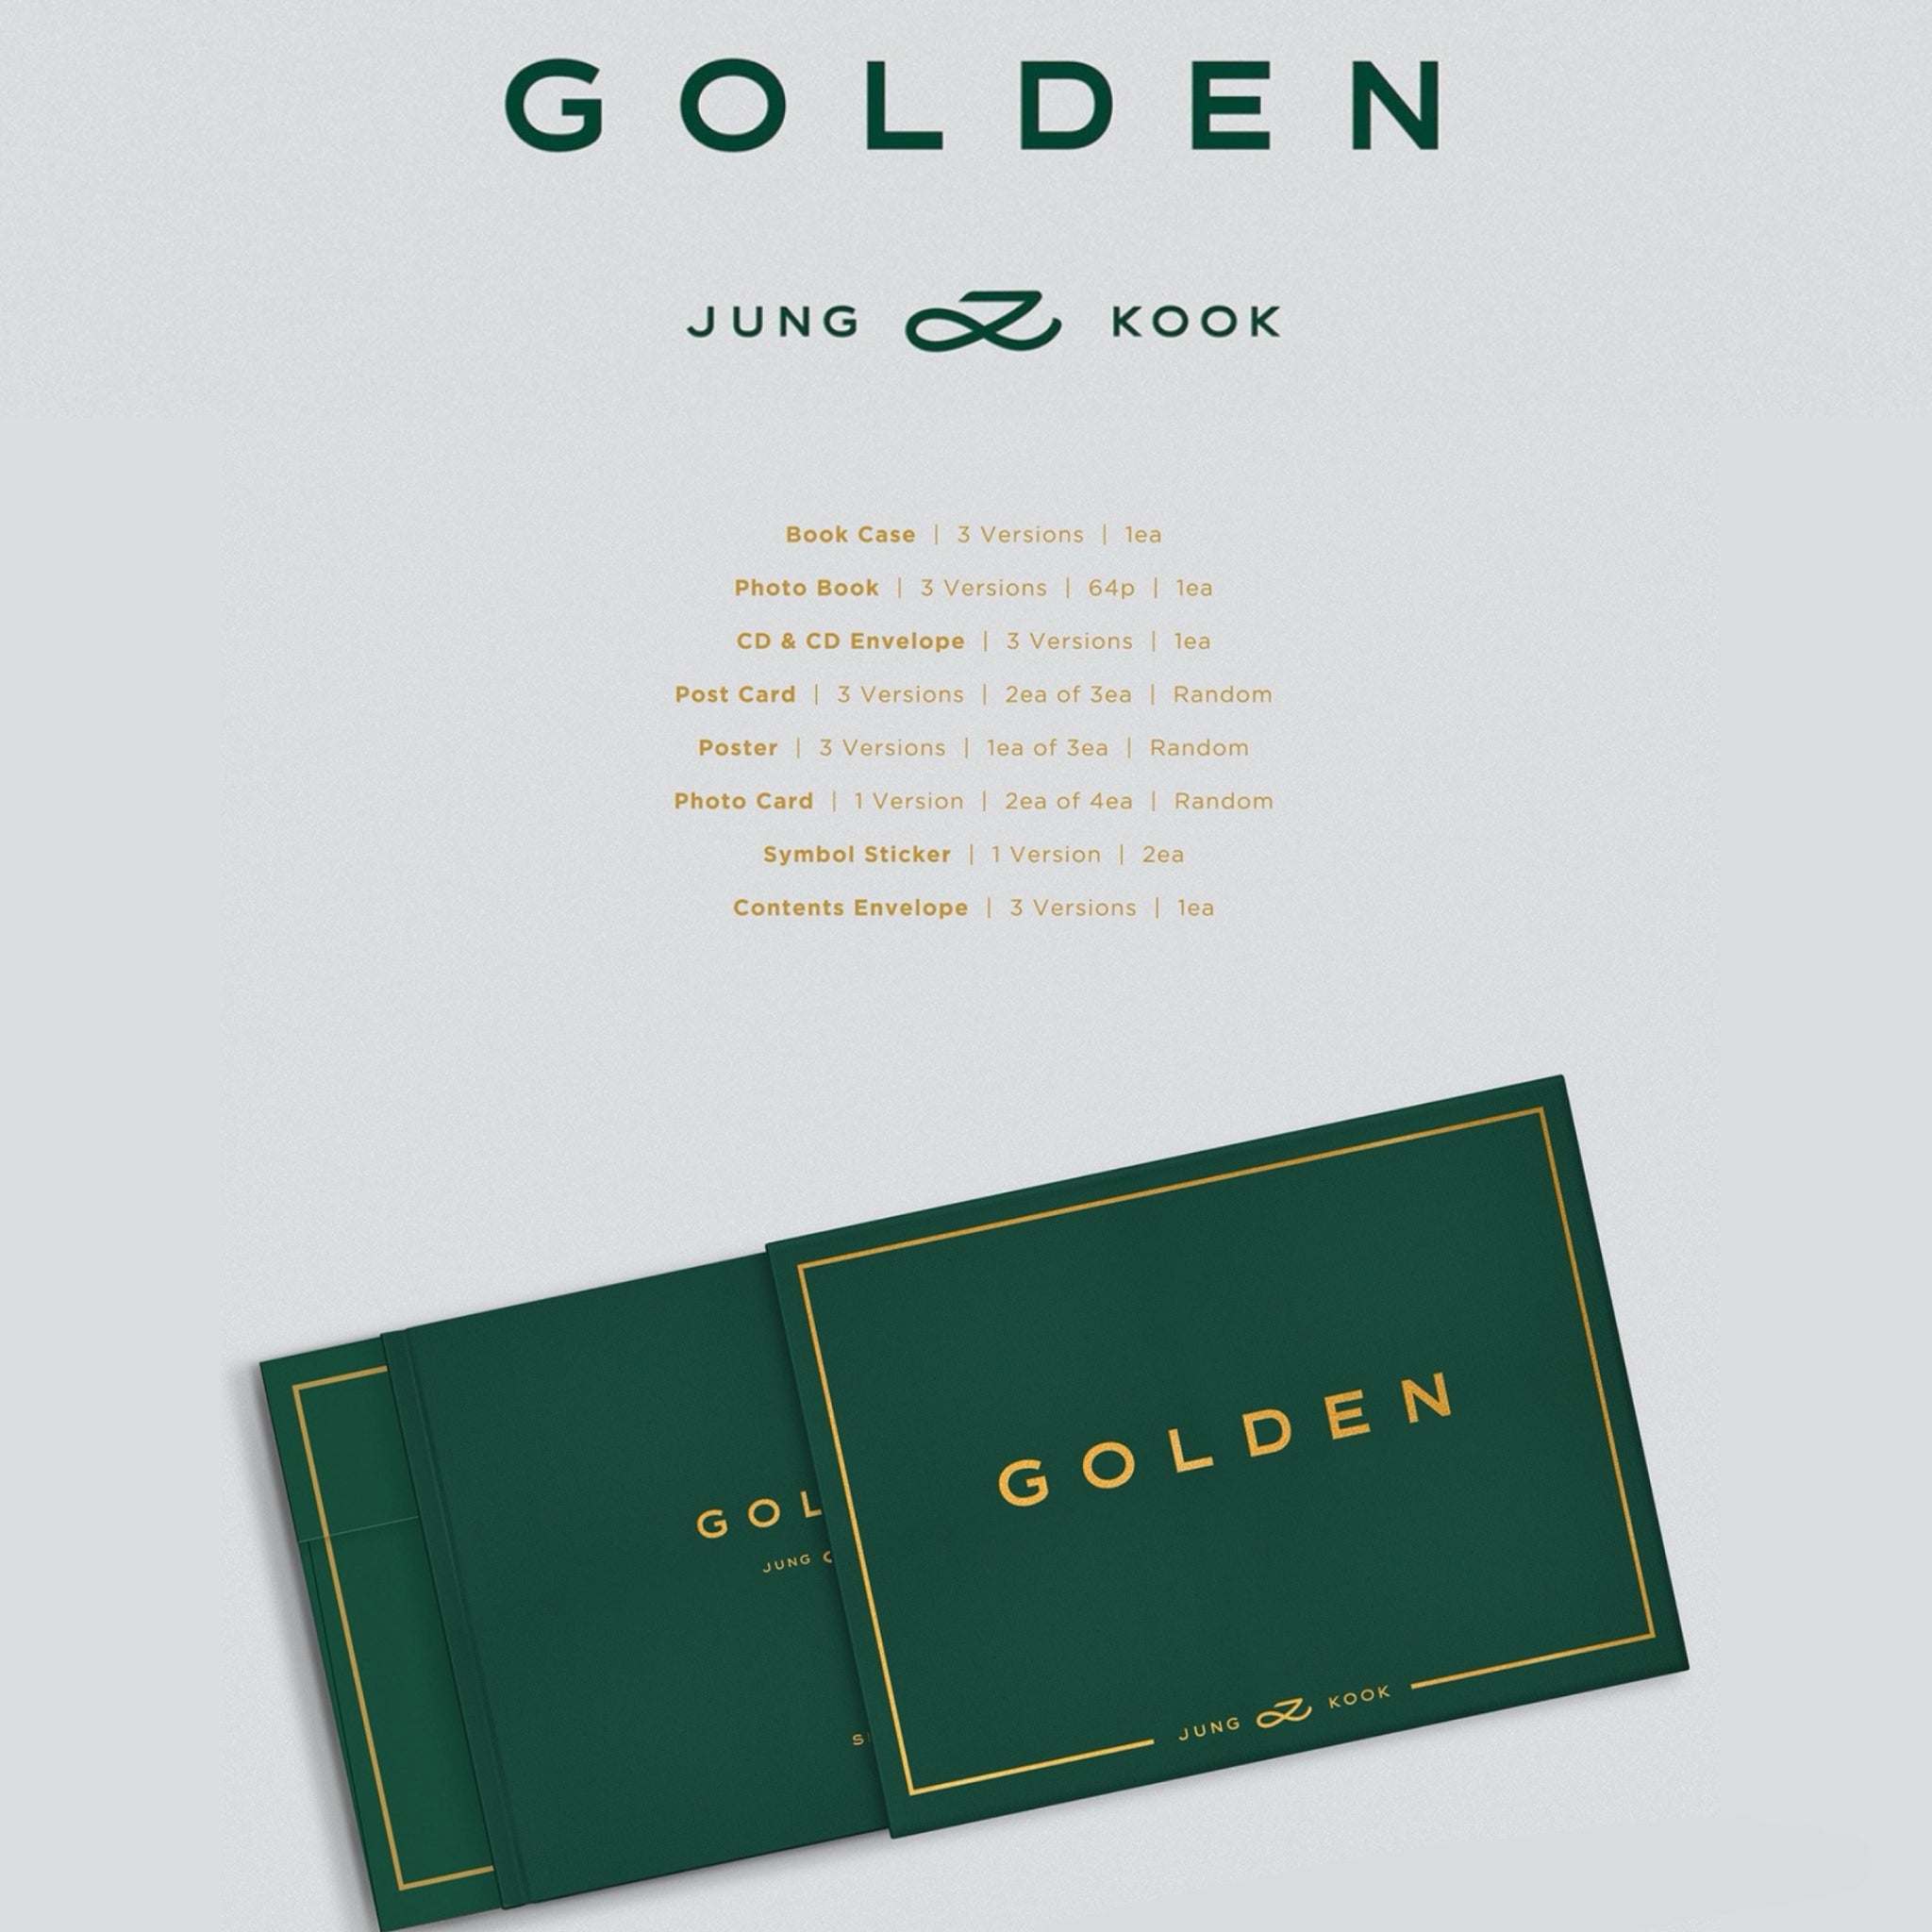 BTS' Jungkook to release first solo album 'Golden